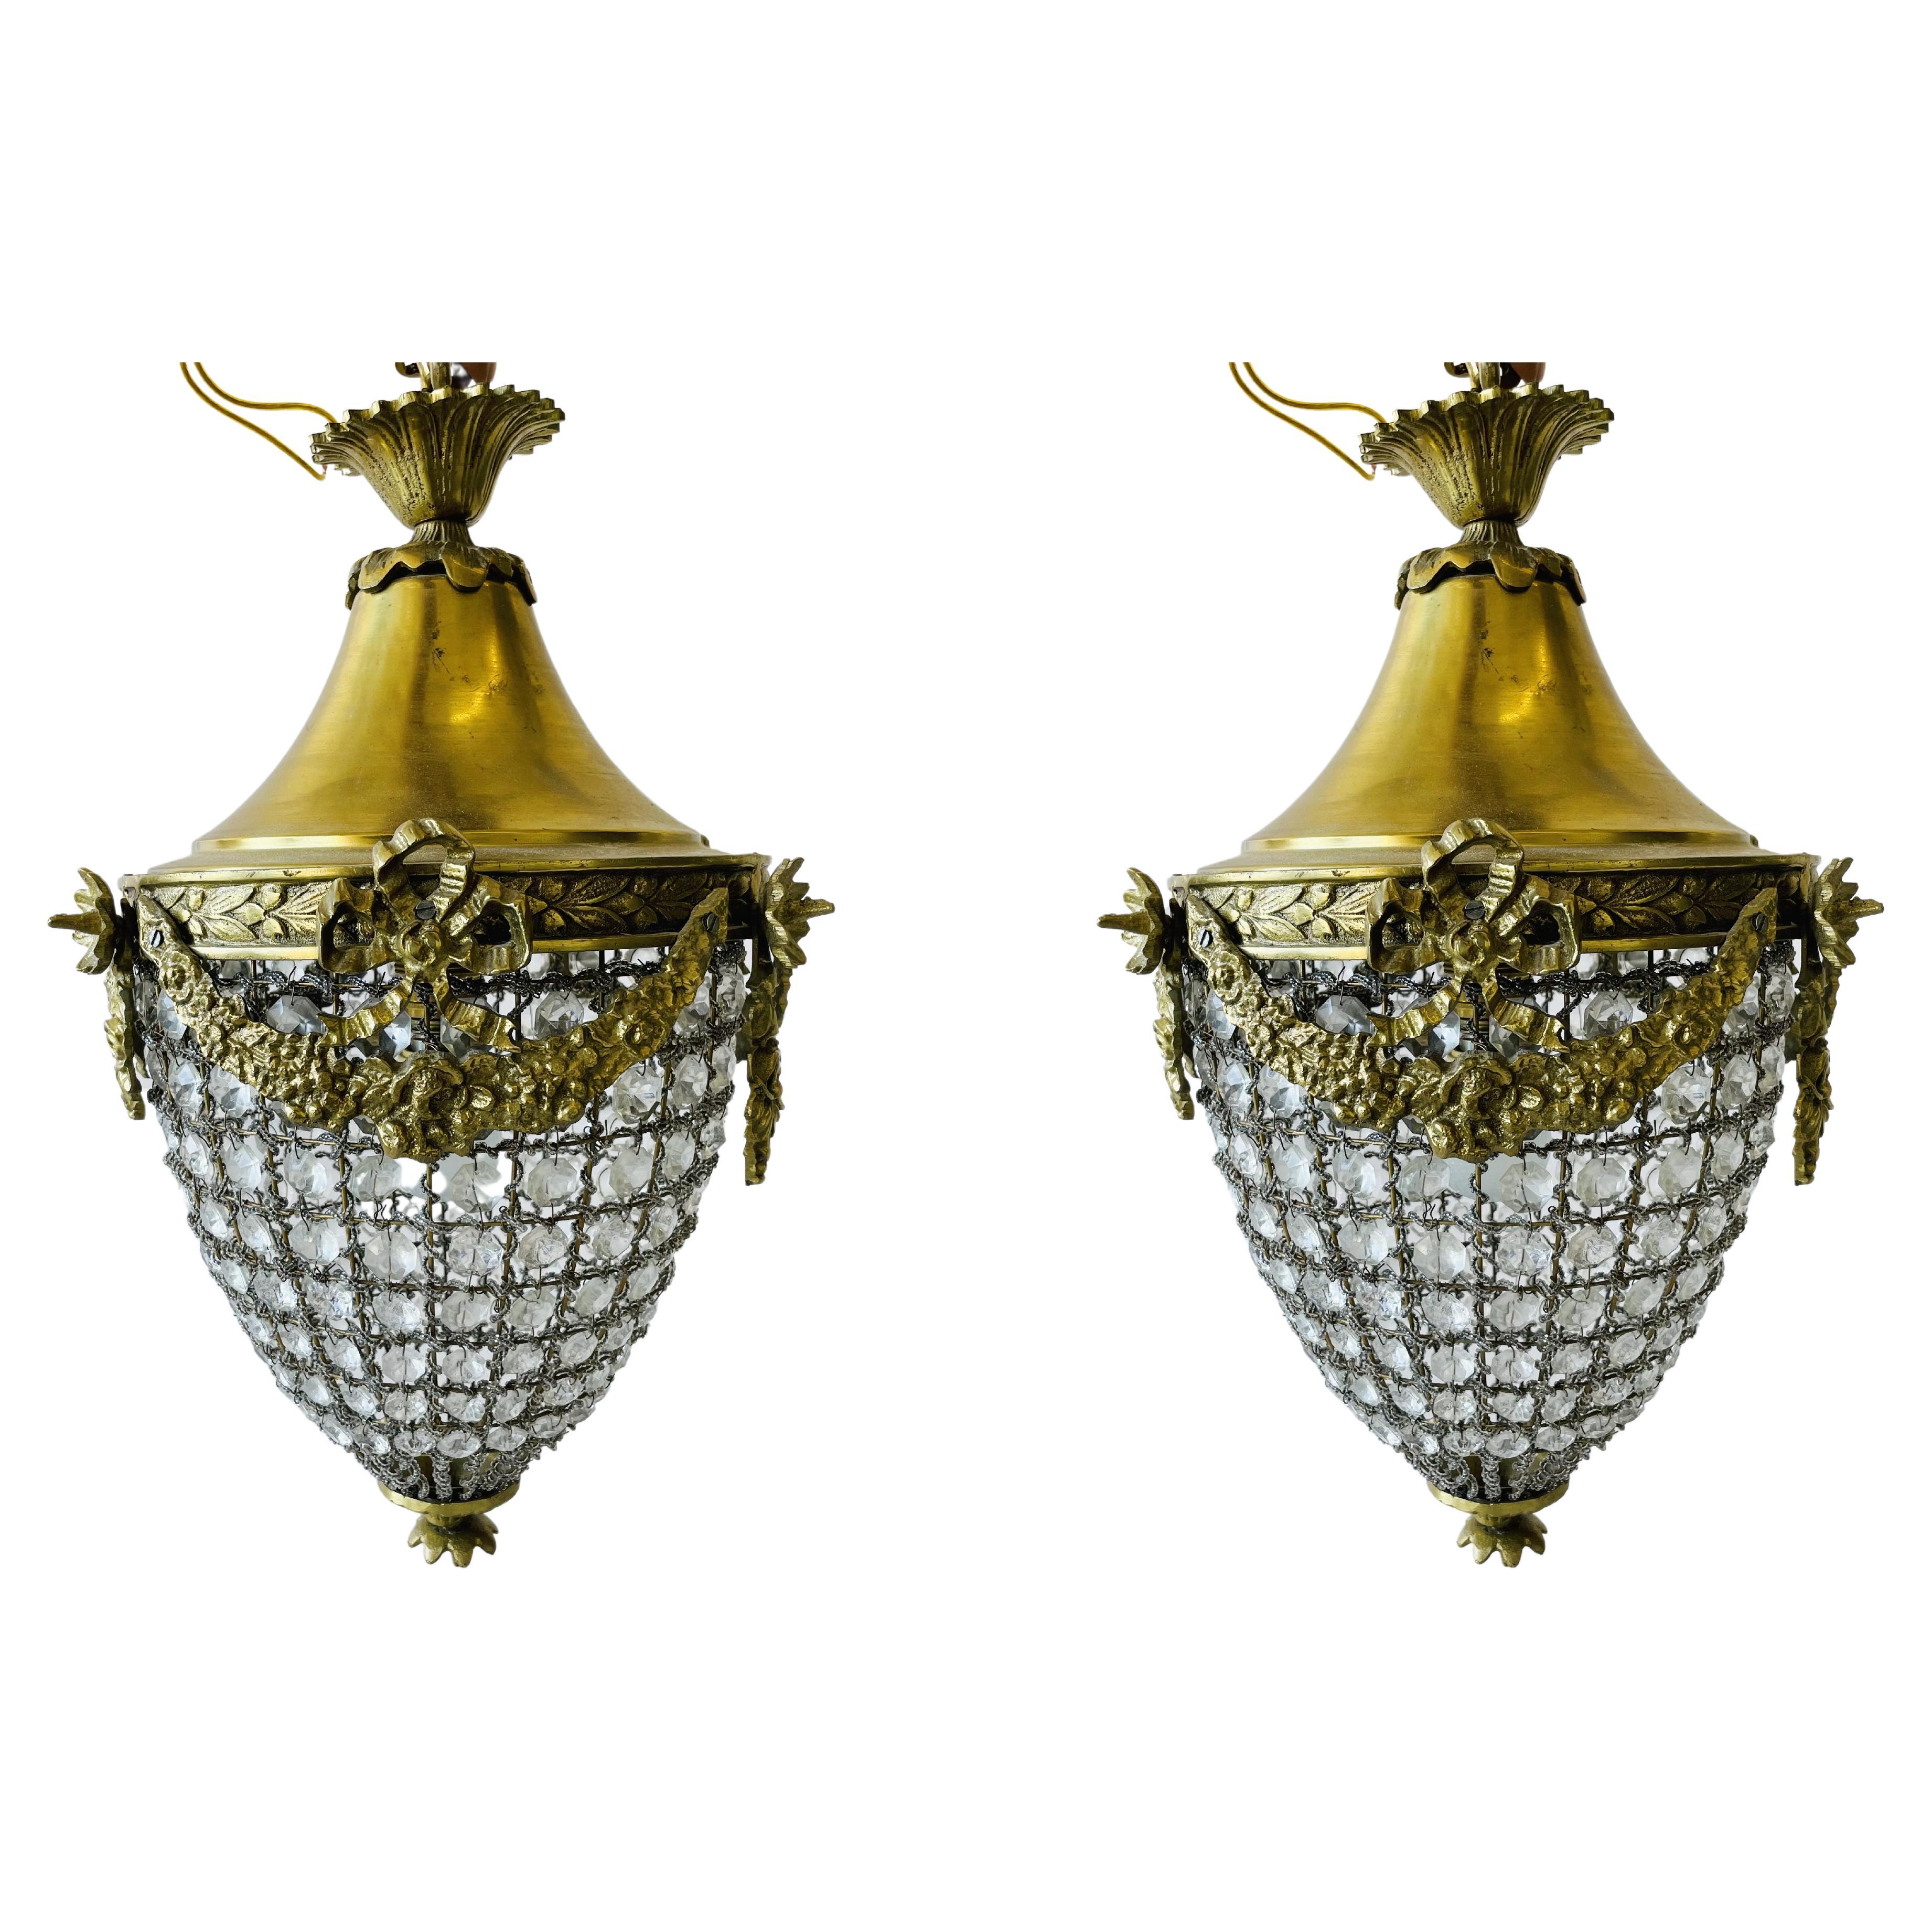 Pair of Antique style Pendant Lights in Solid Brass & Cut Glass For Sale